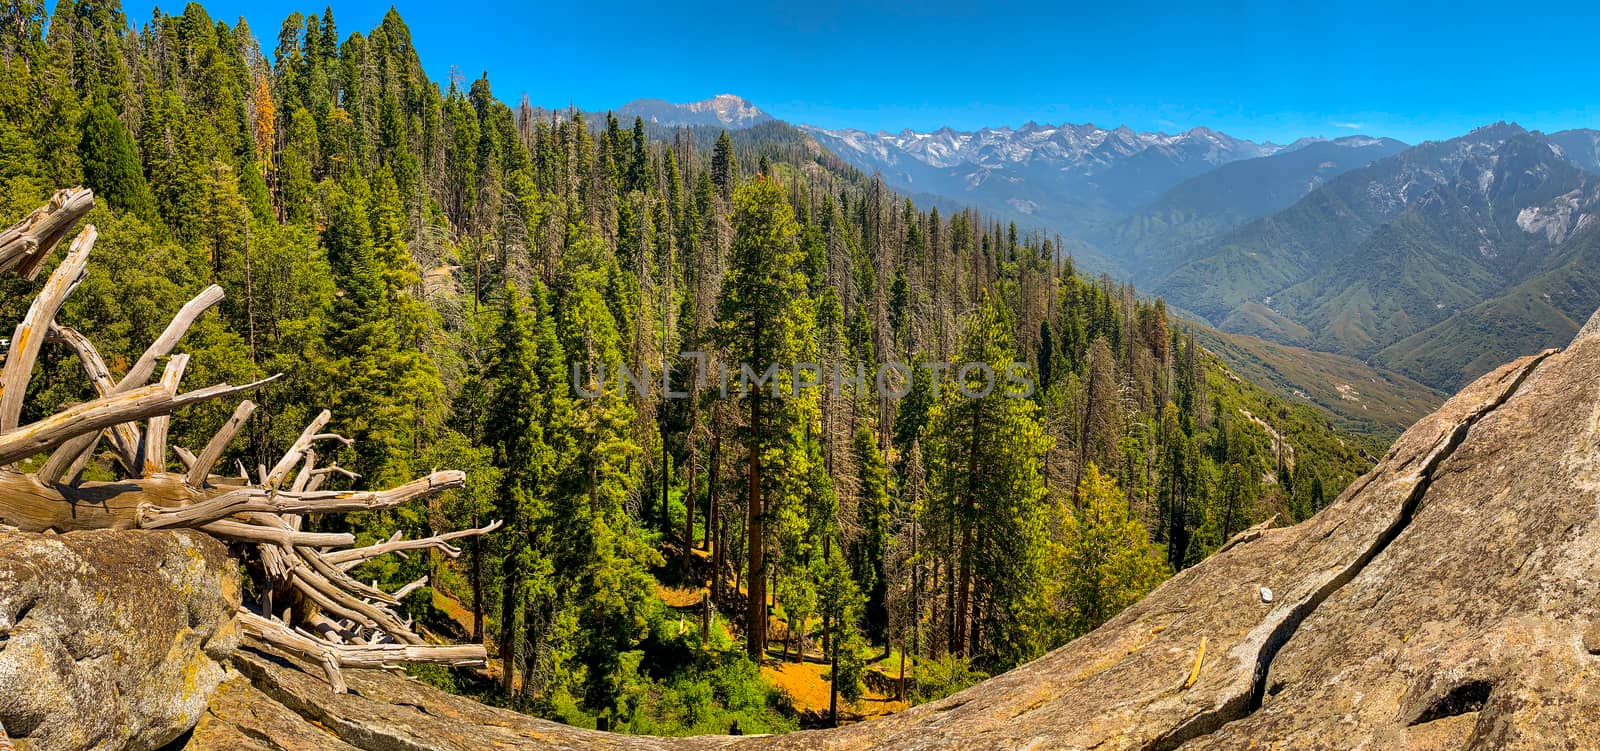 Sequoia National Park in California, USA by nicousnake